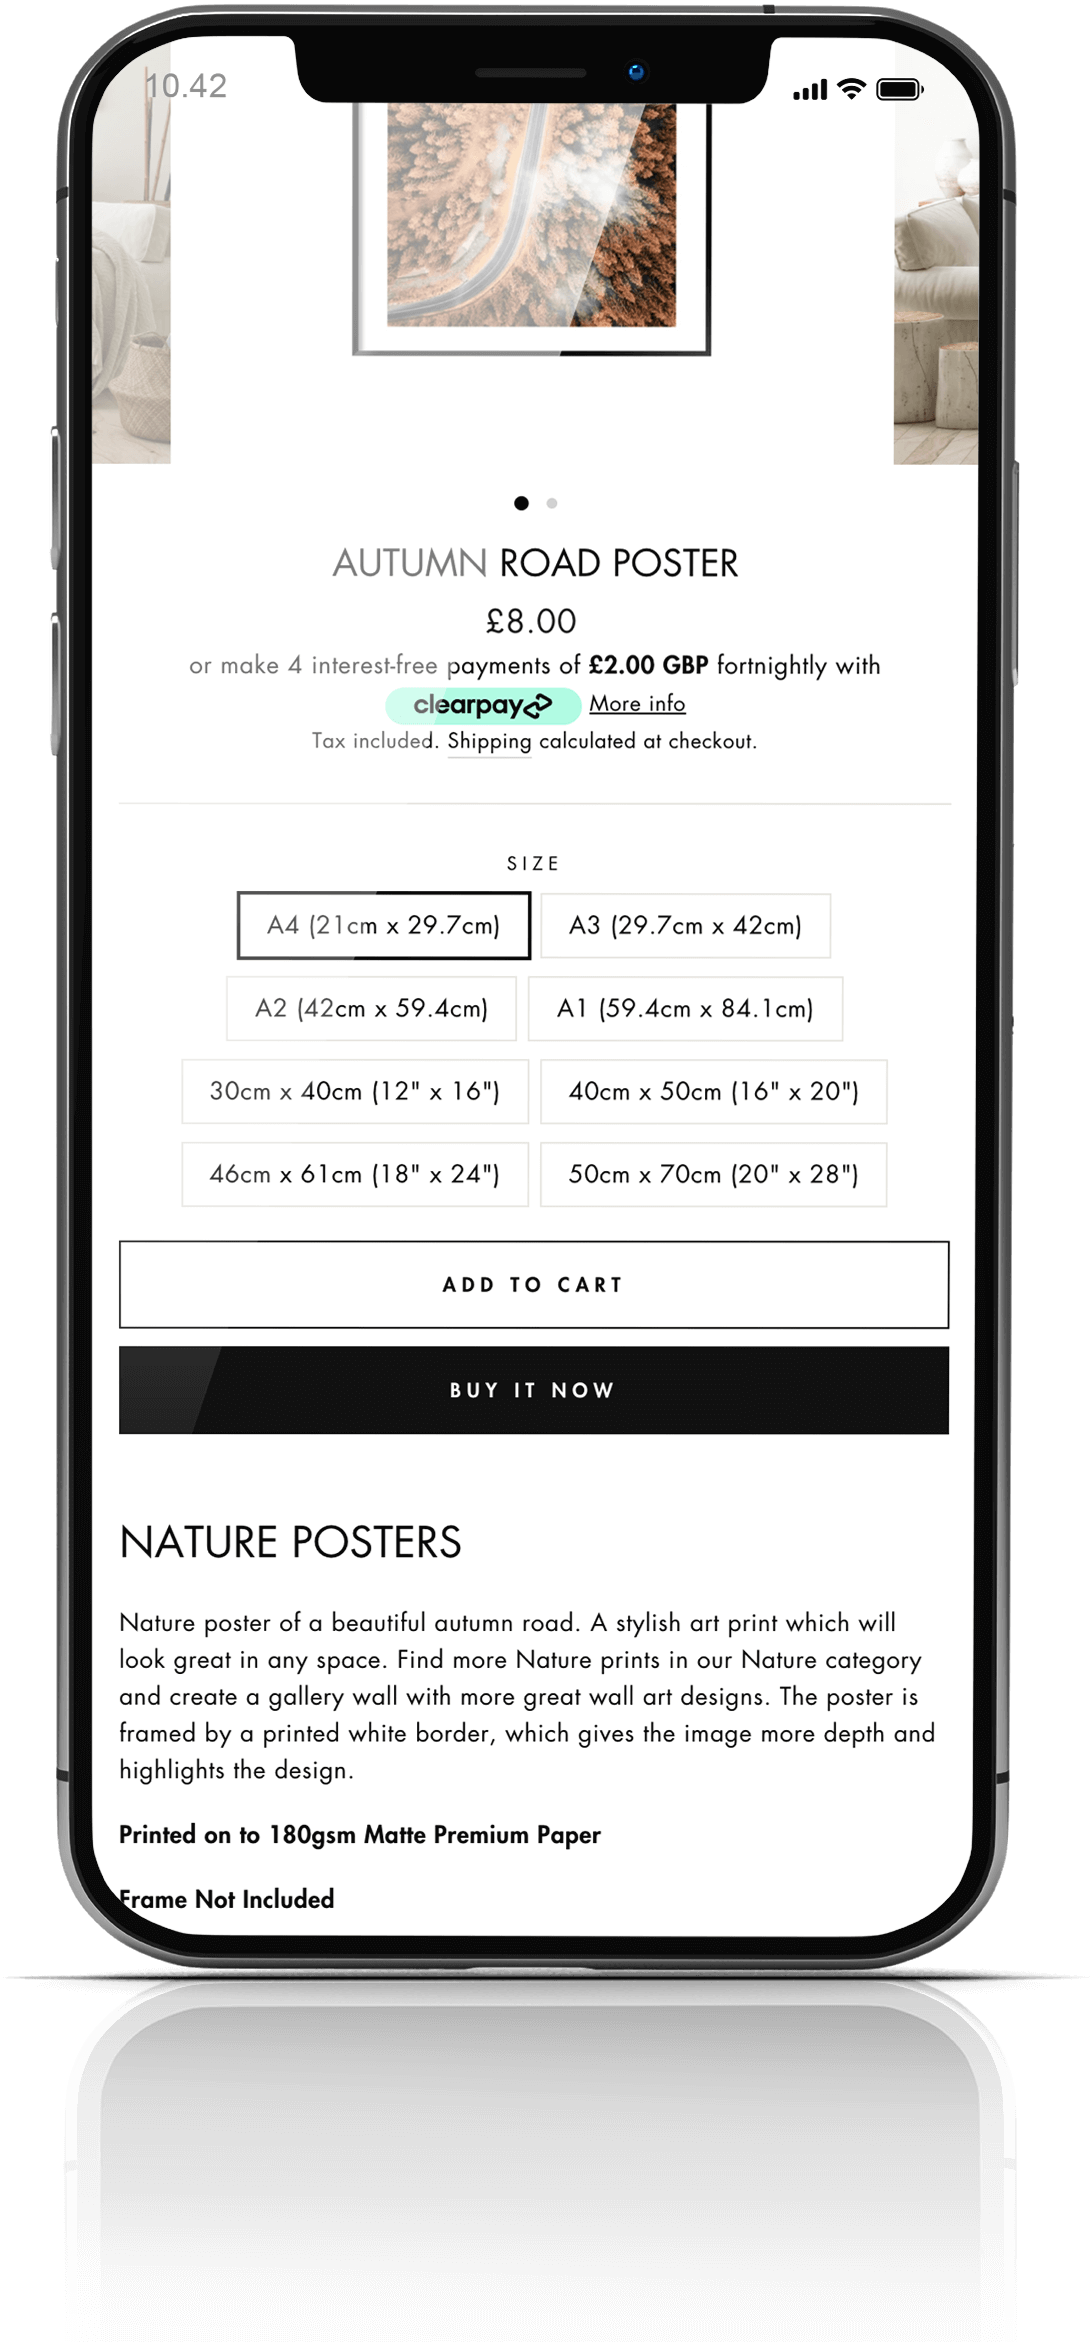 Website on a mobile